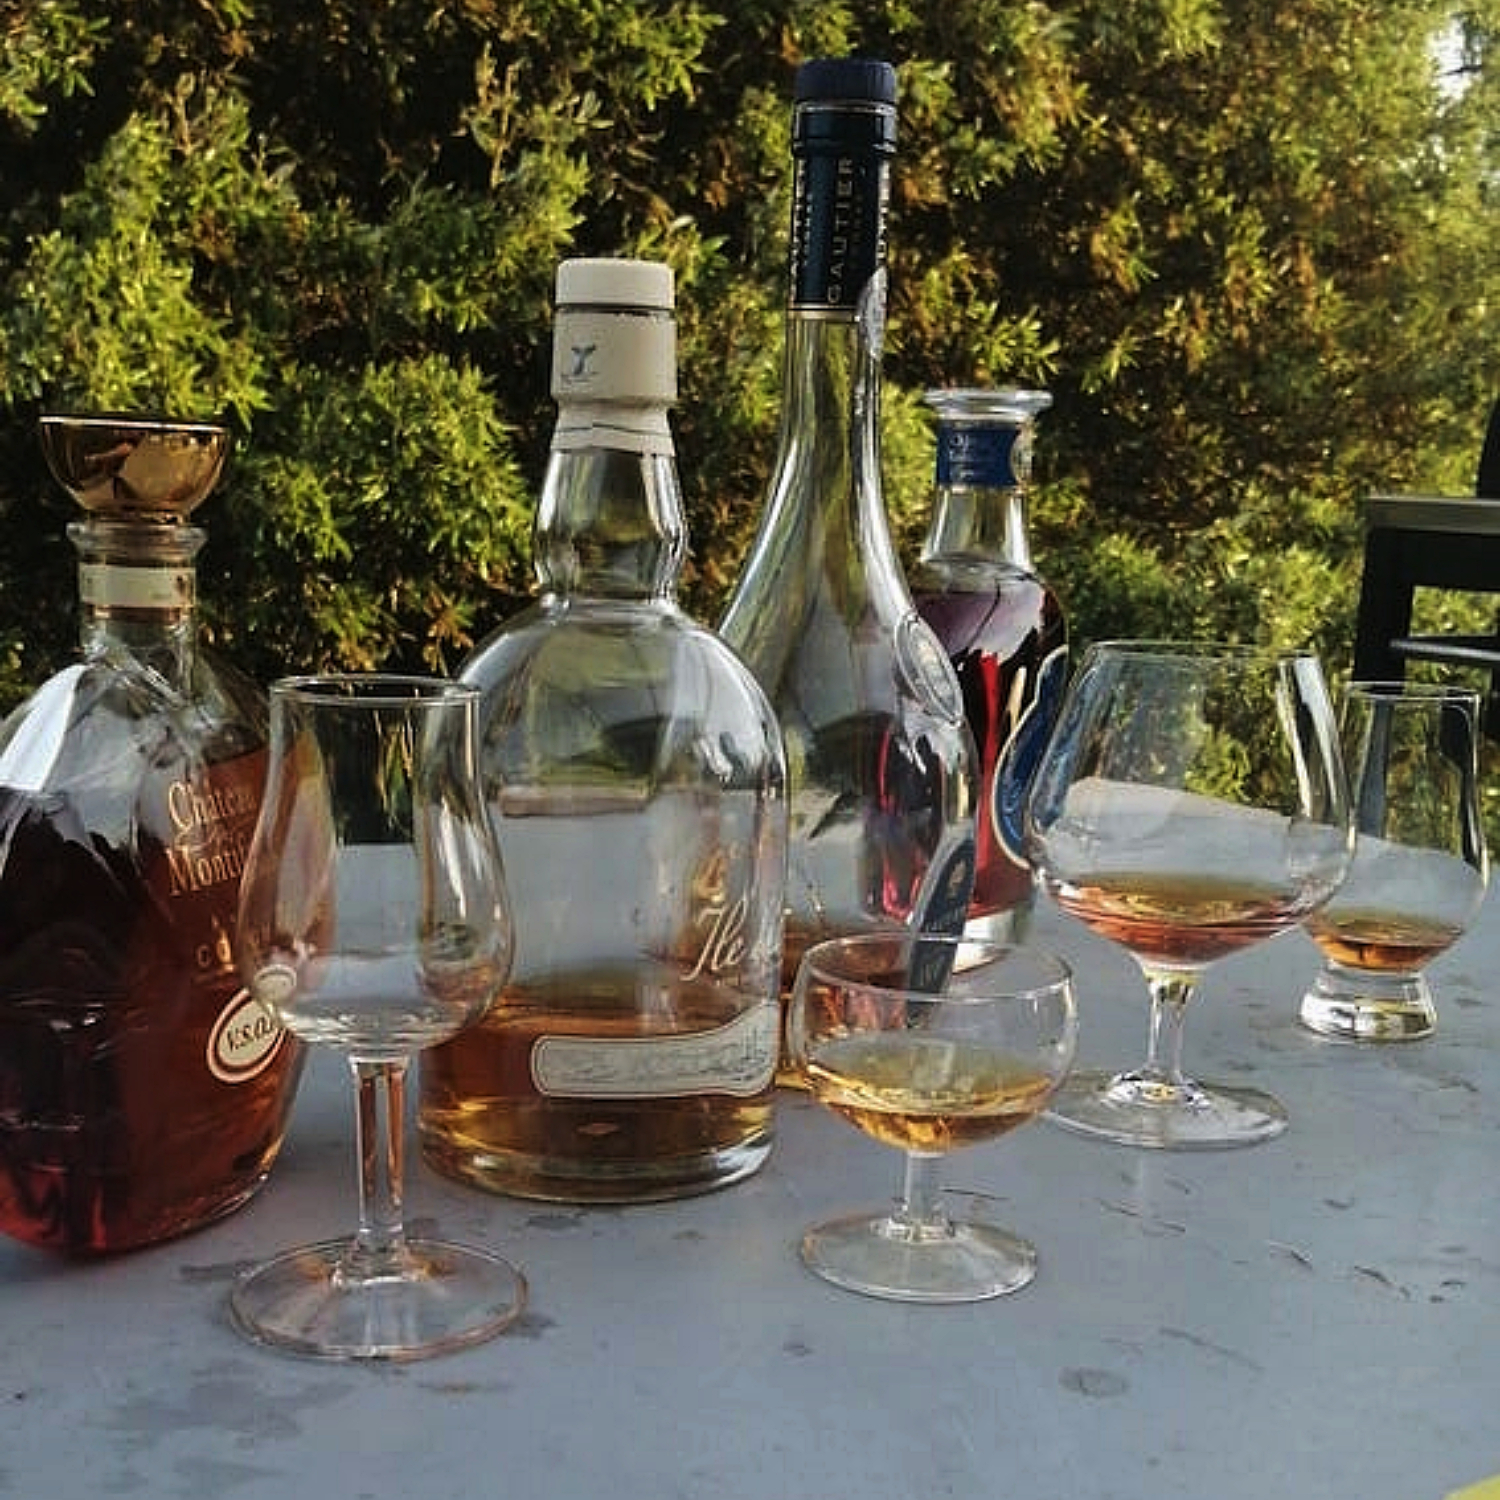 Cognac degustation with several different ones